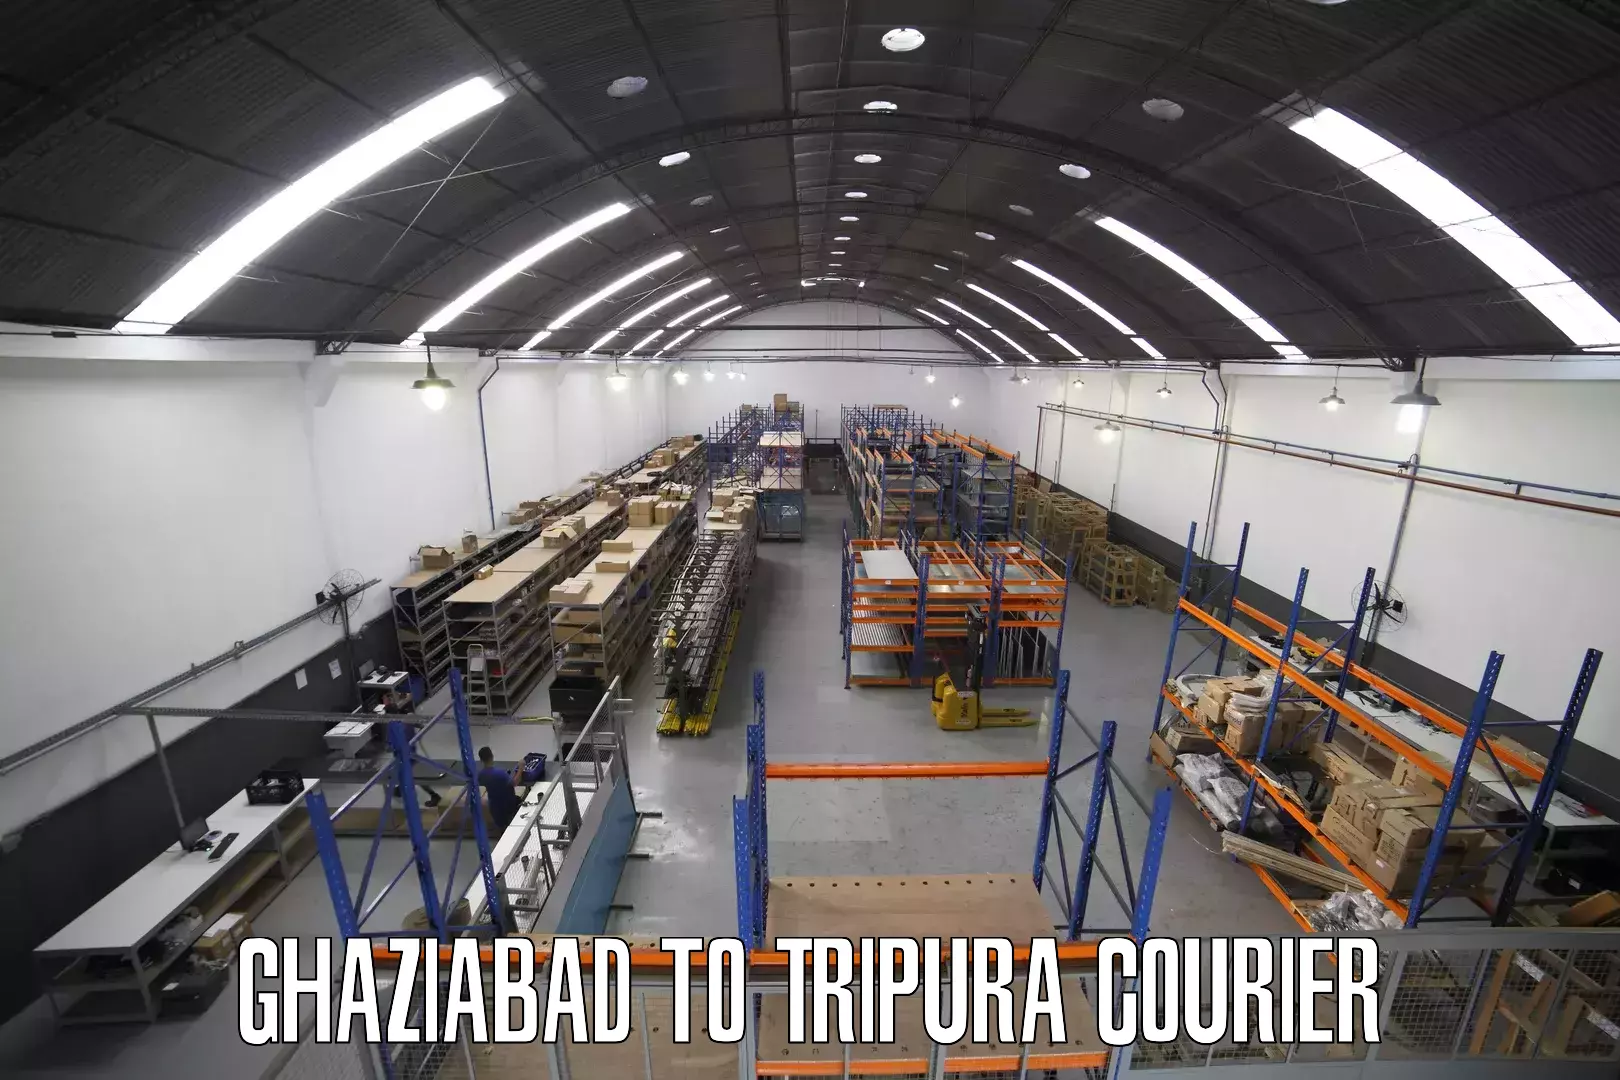 State-of-the-art courier technology Ghaziabad to Santirbazar